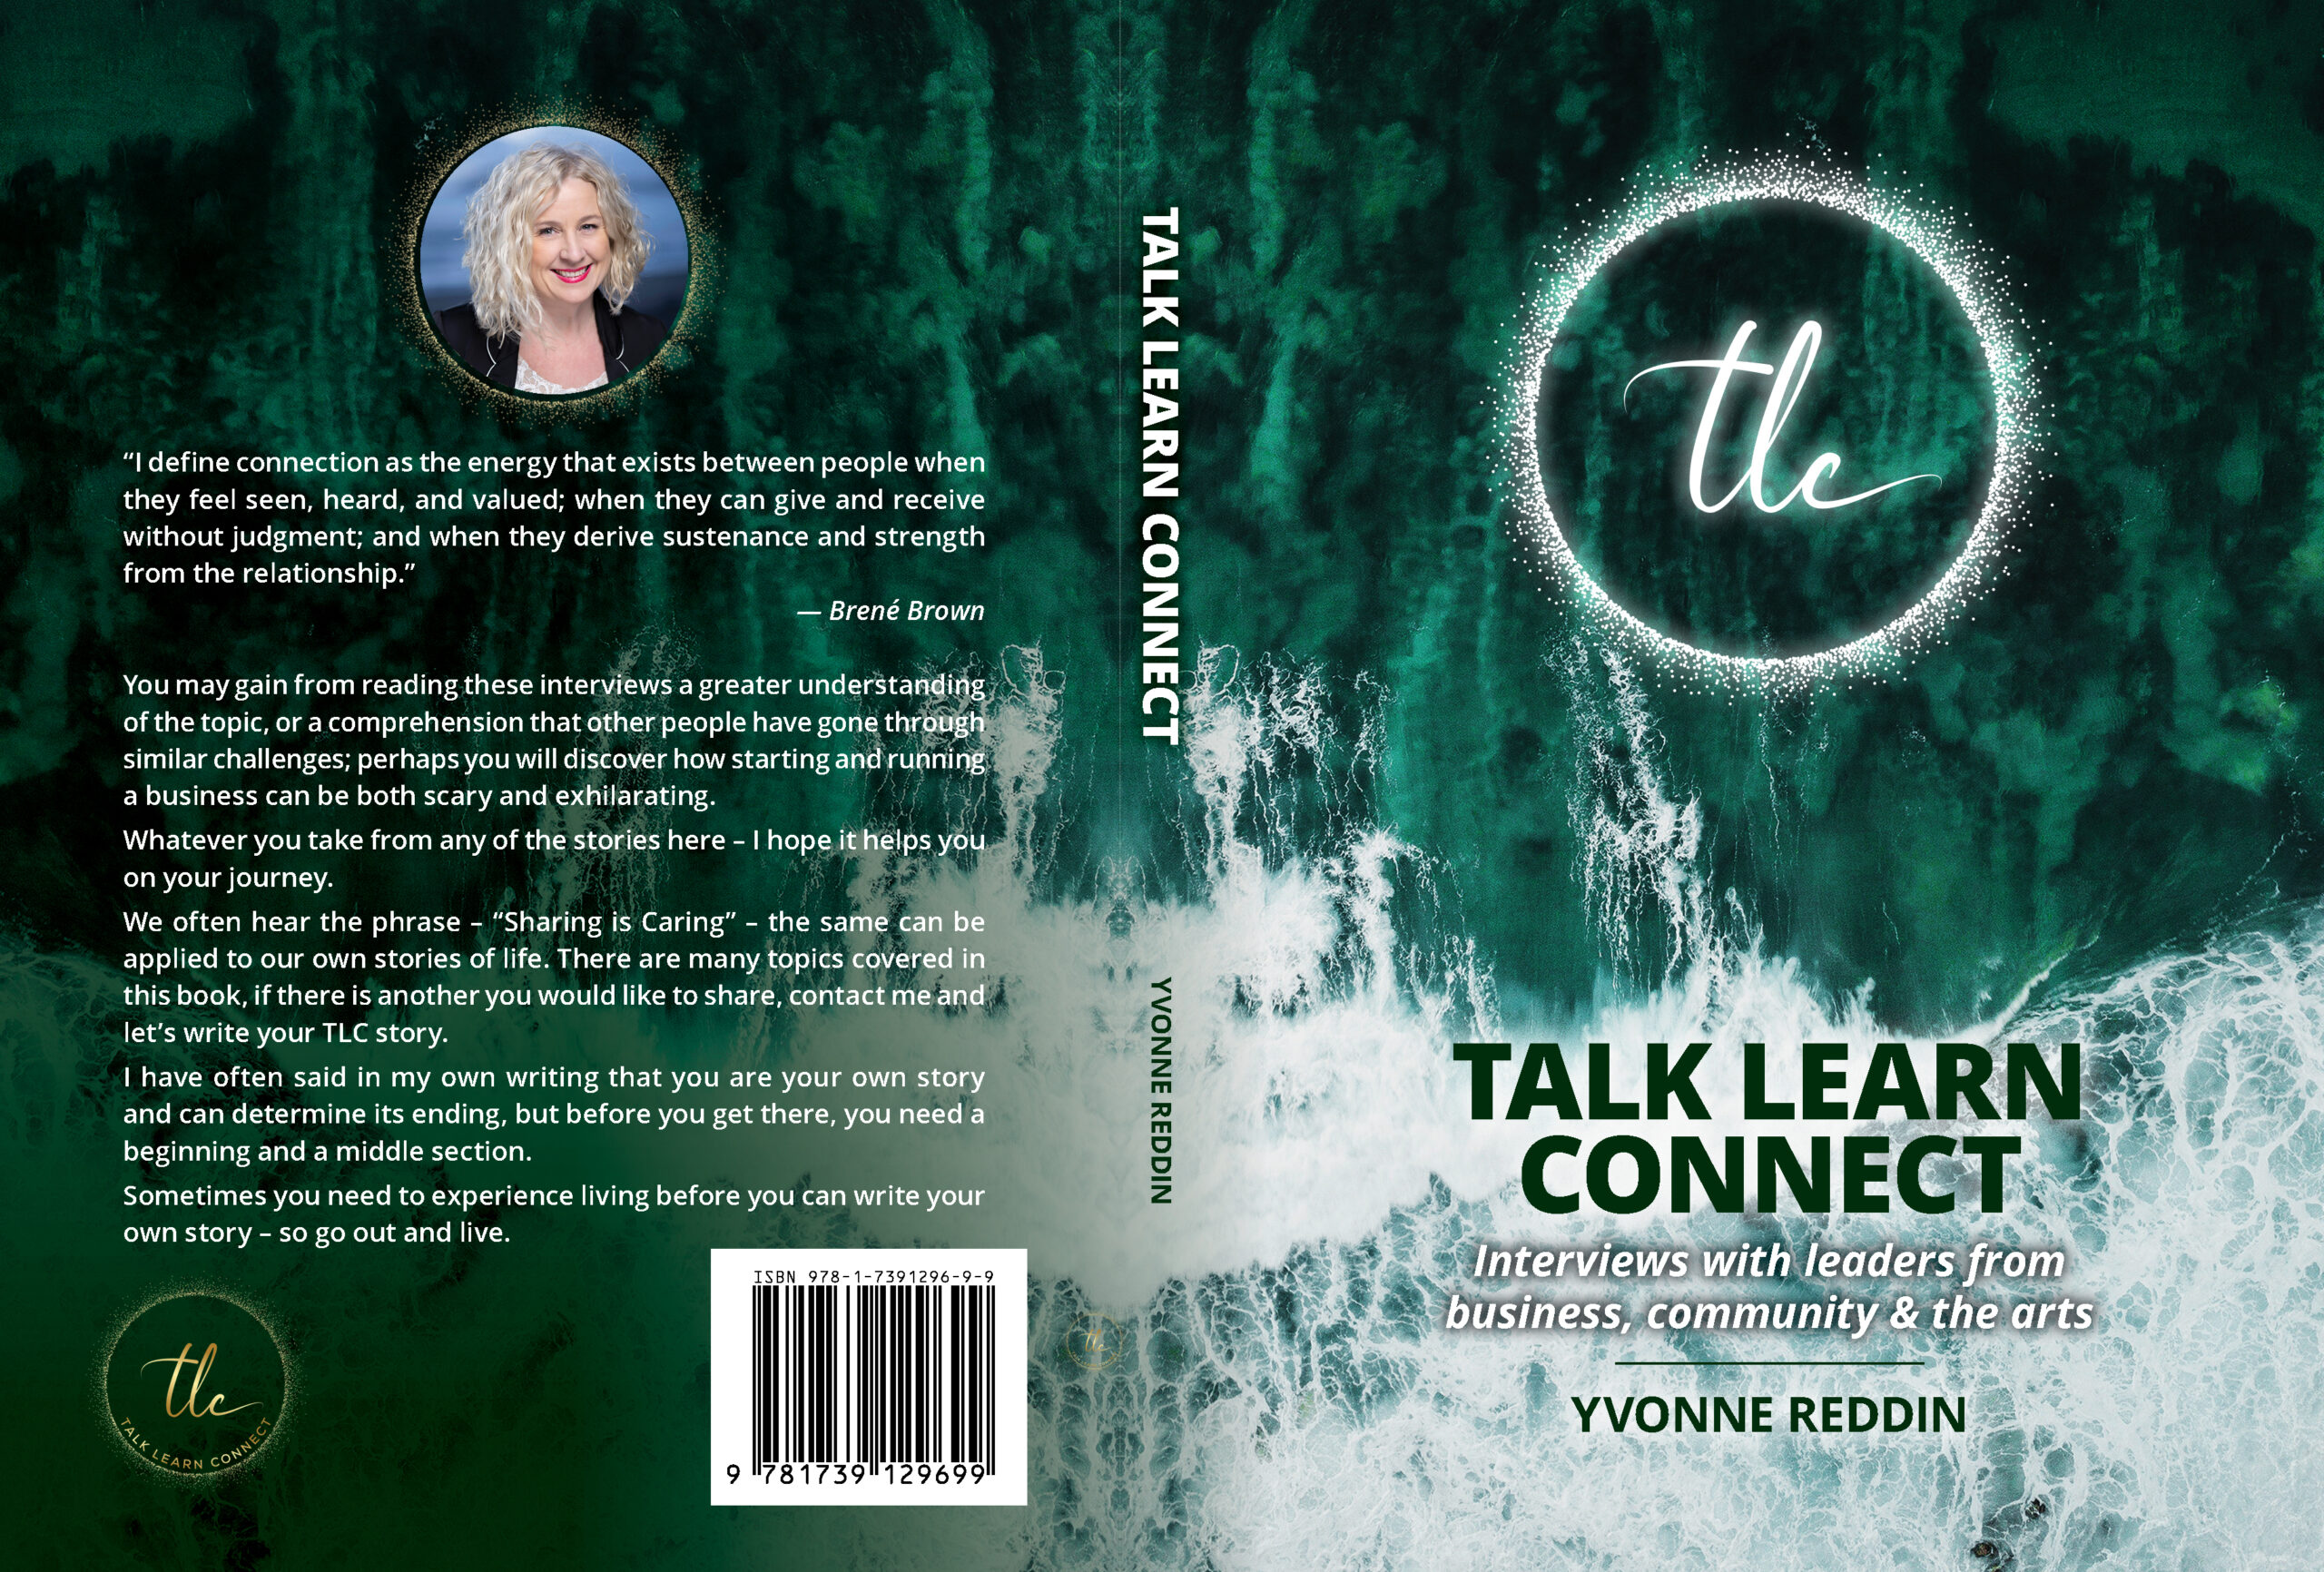 Talk Learn Connect book